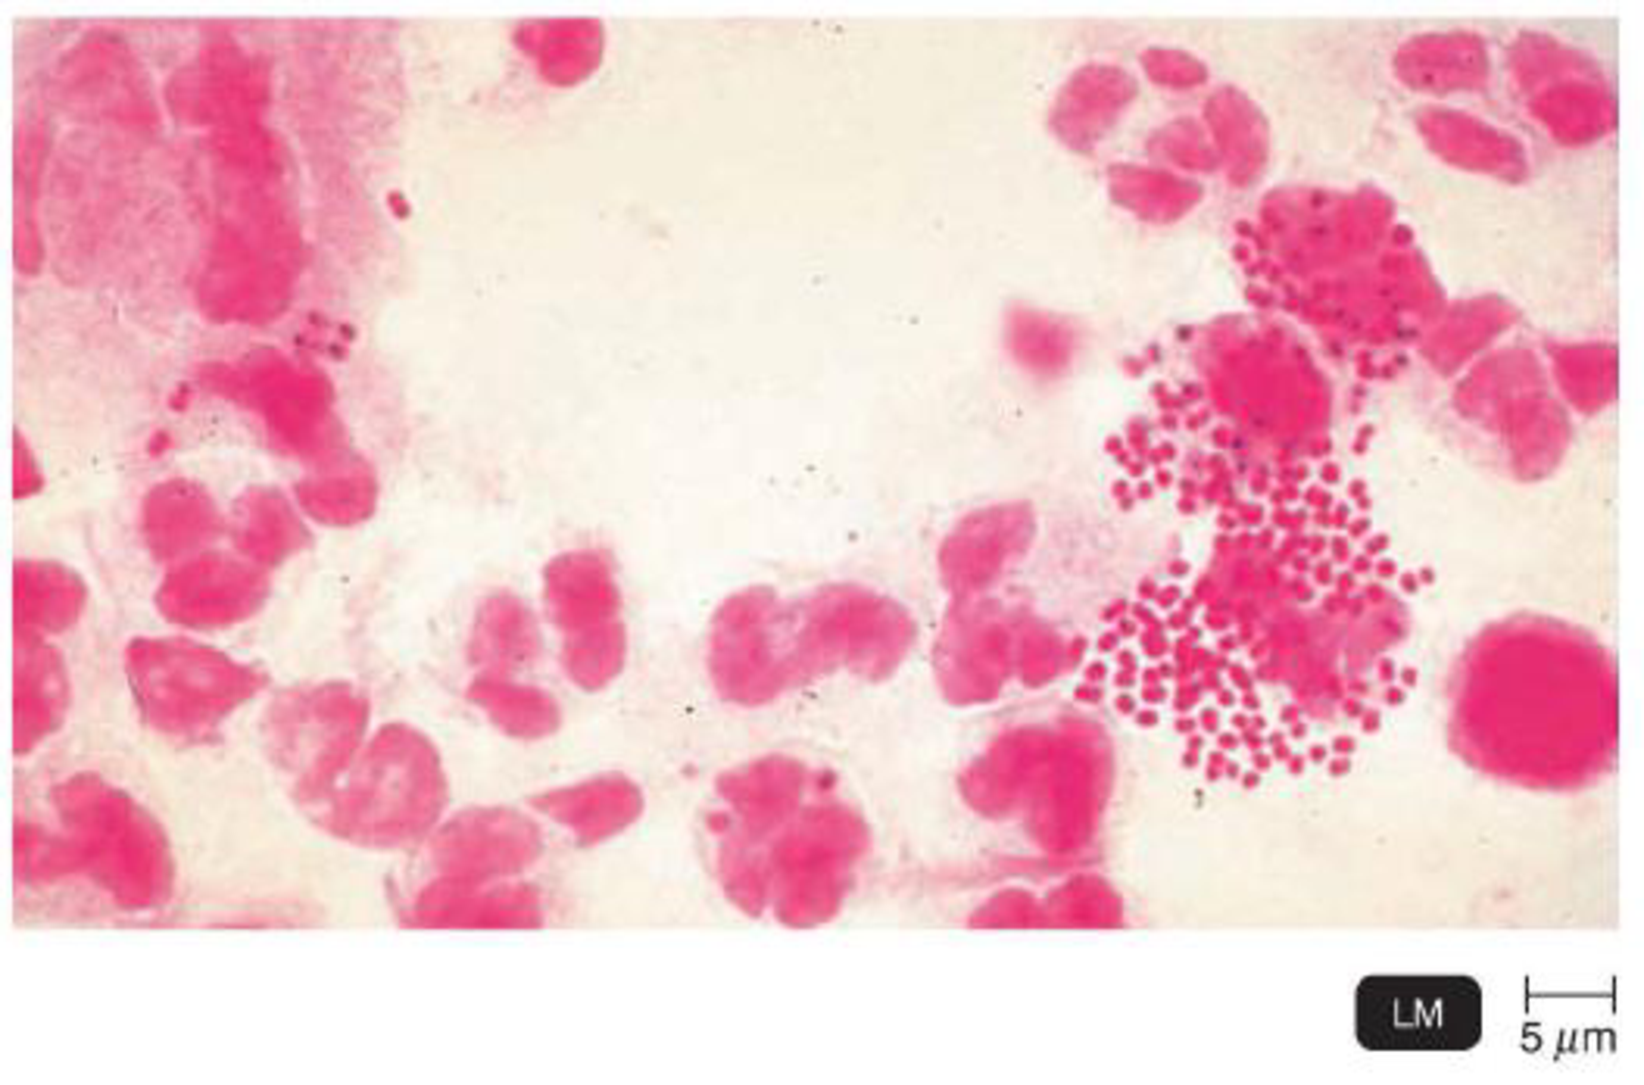 Chapter 3, Problem 2CAE, Laboratory diagnosis of Neisseria gonorrhoeae infection is based on microscopic examination of 